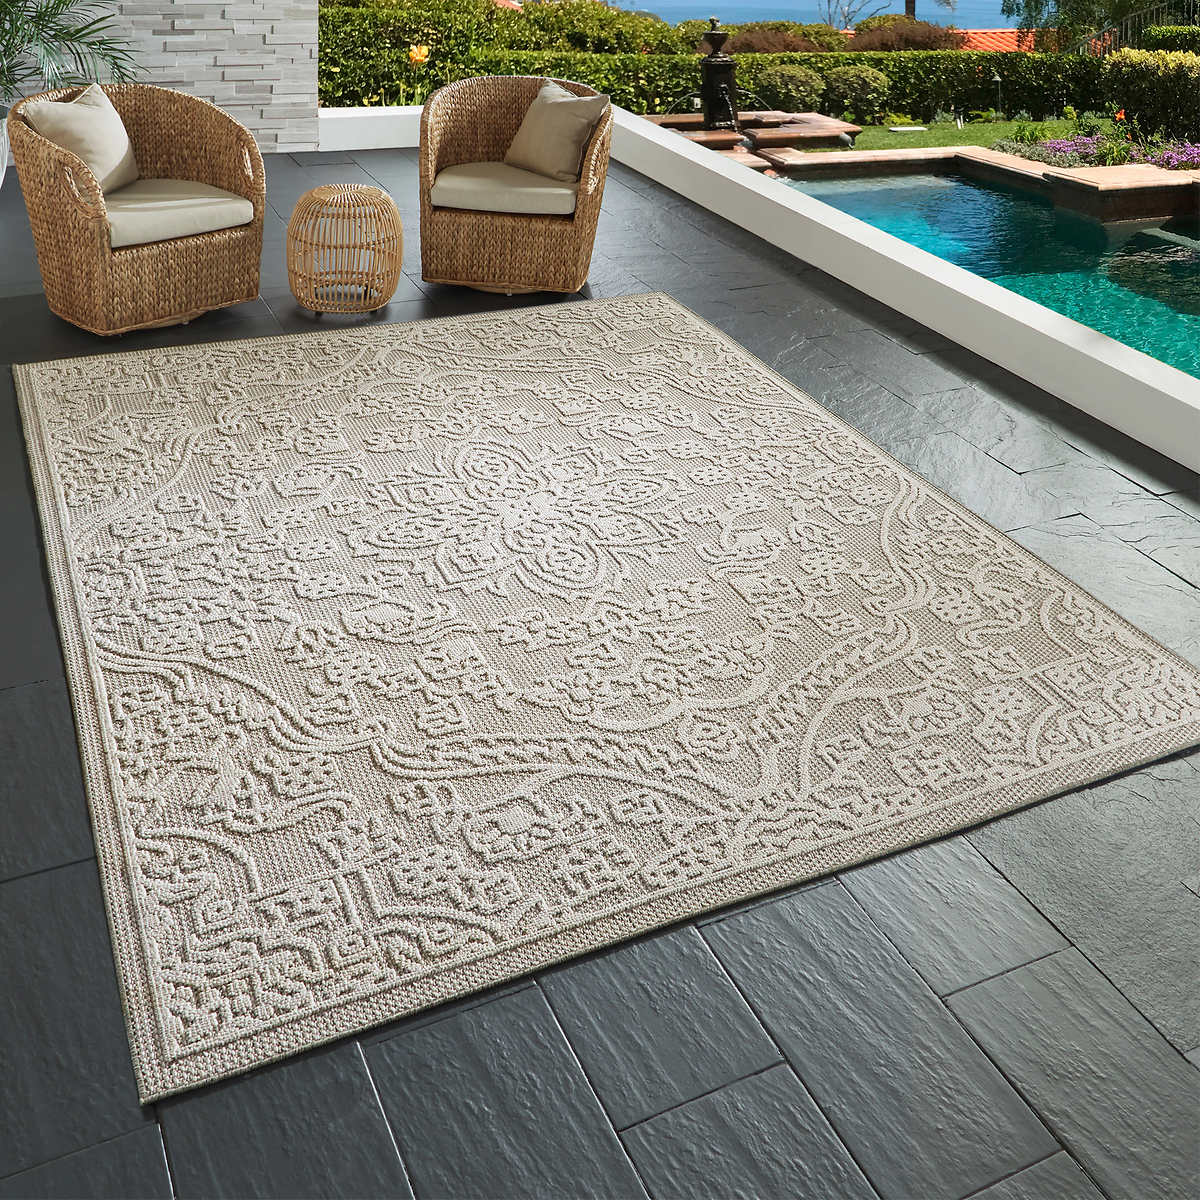 Boat Rugs & Carpet  Stylish Options for Outdoors or Indoors